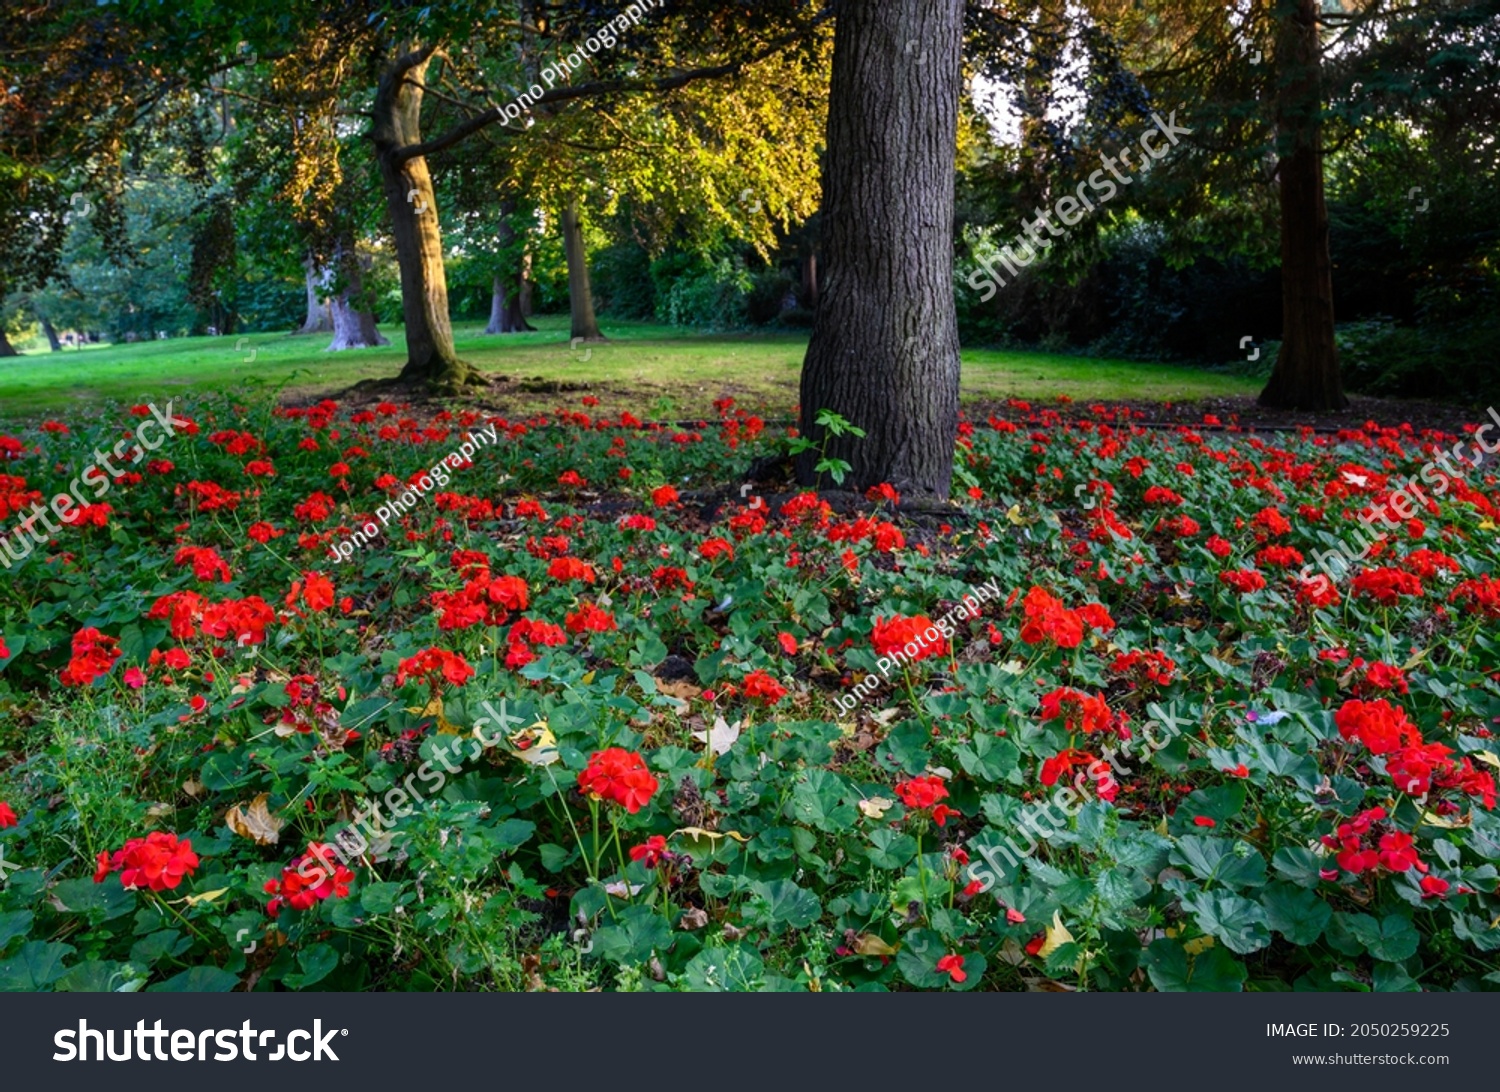 Bright red flowers and trees in the Knoll park. Focus on foreground flowers. The Knoll is a small PUBLIC PARK in Hayes, Kent, UK. Hayes is in the Borough of Bromley in Greater London. #2050259225